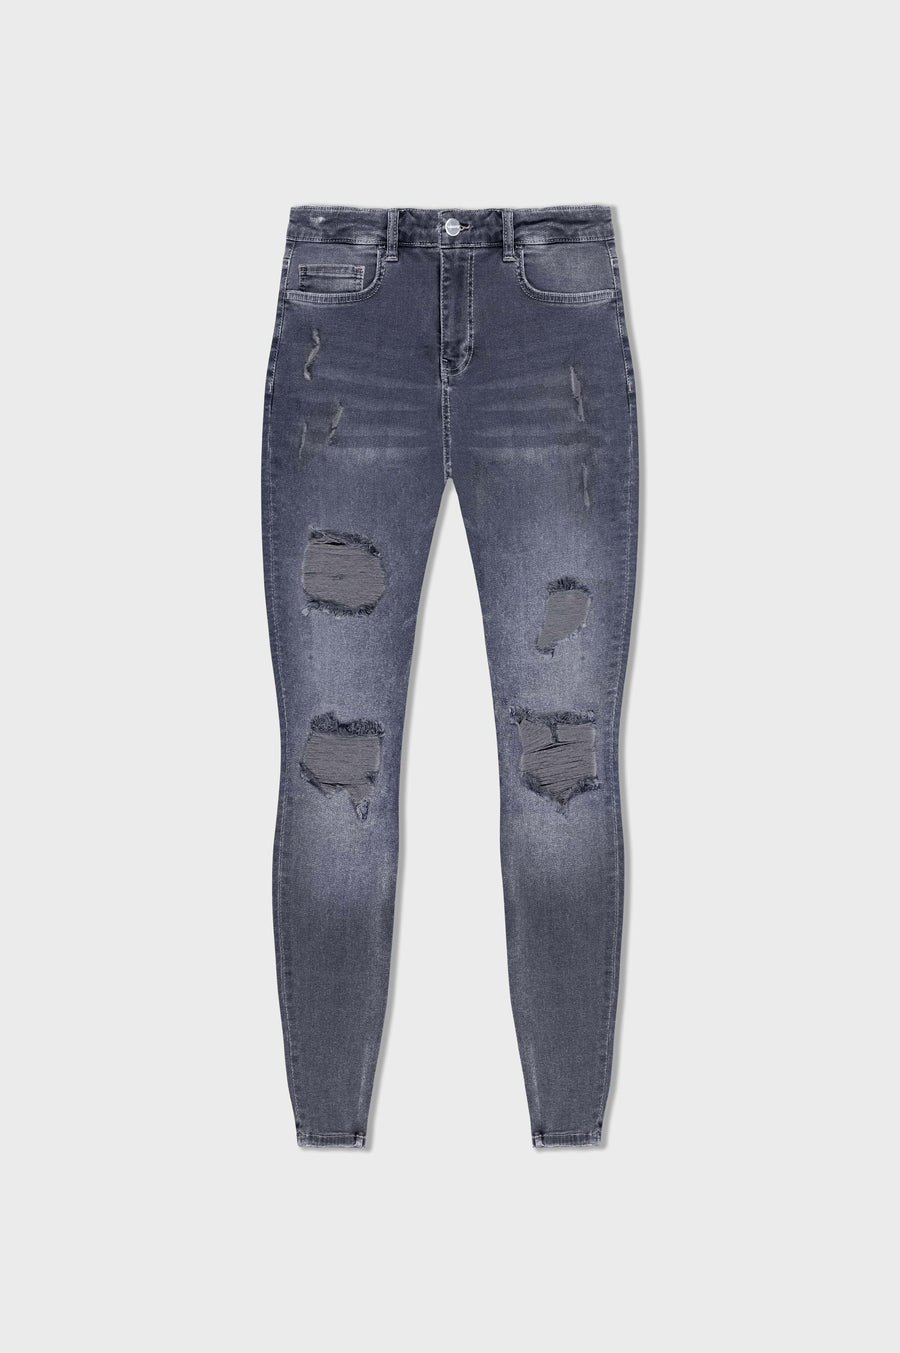 Legend London Jeans - spray on LIGHT GREY JEANS - RIPPED & REPAIRED